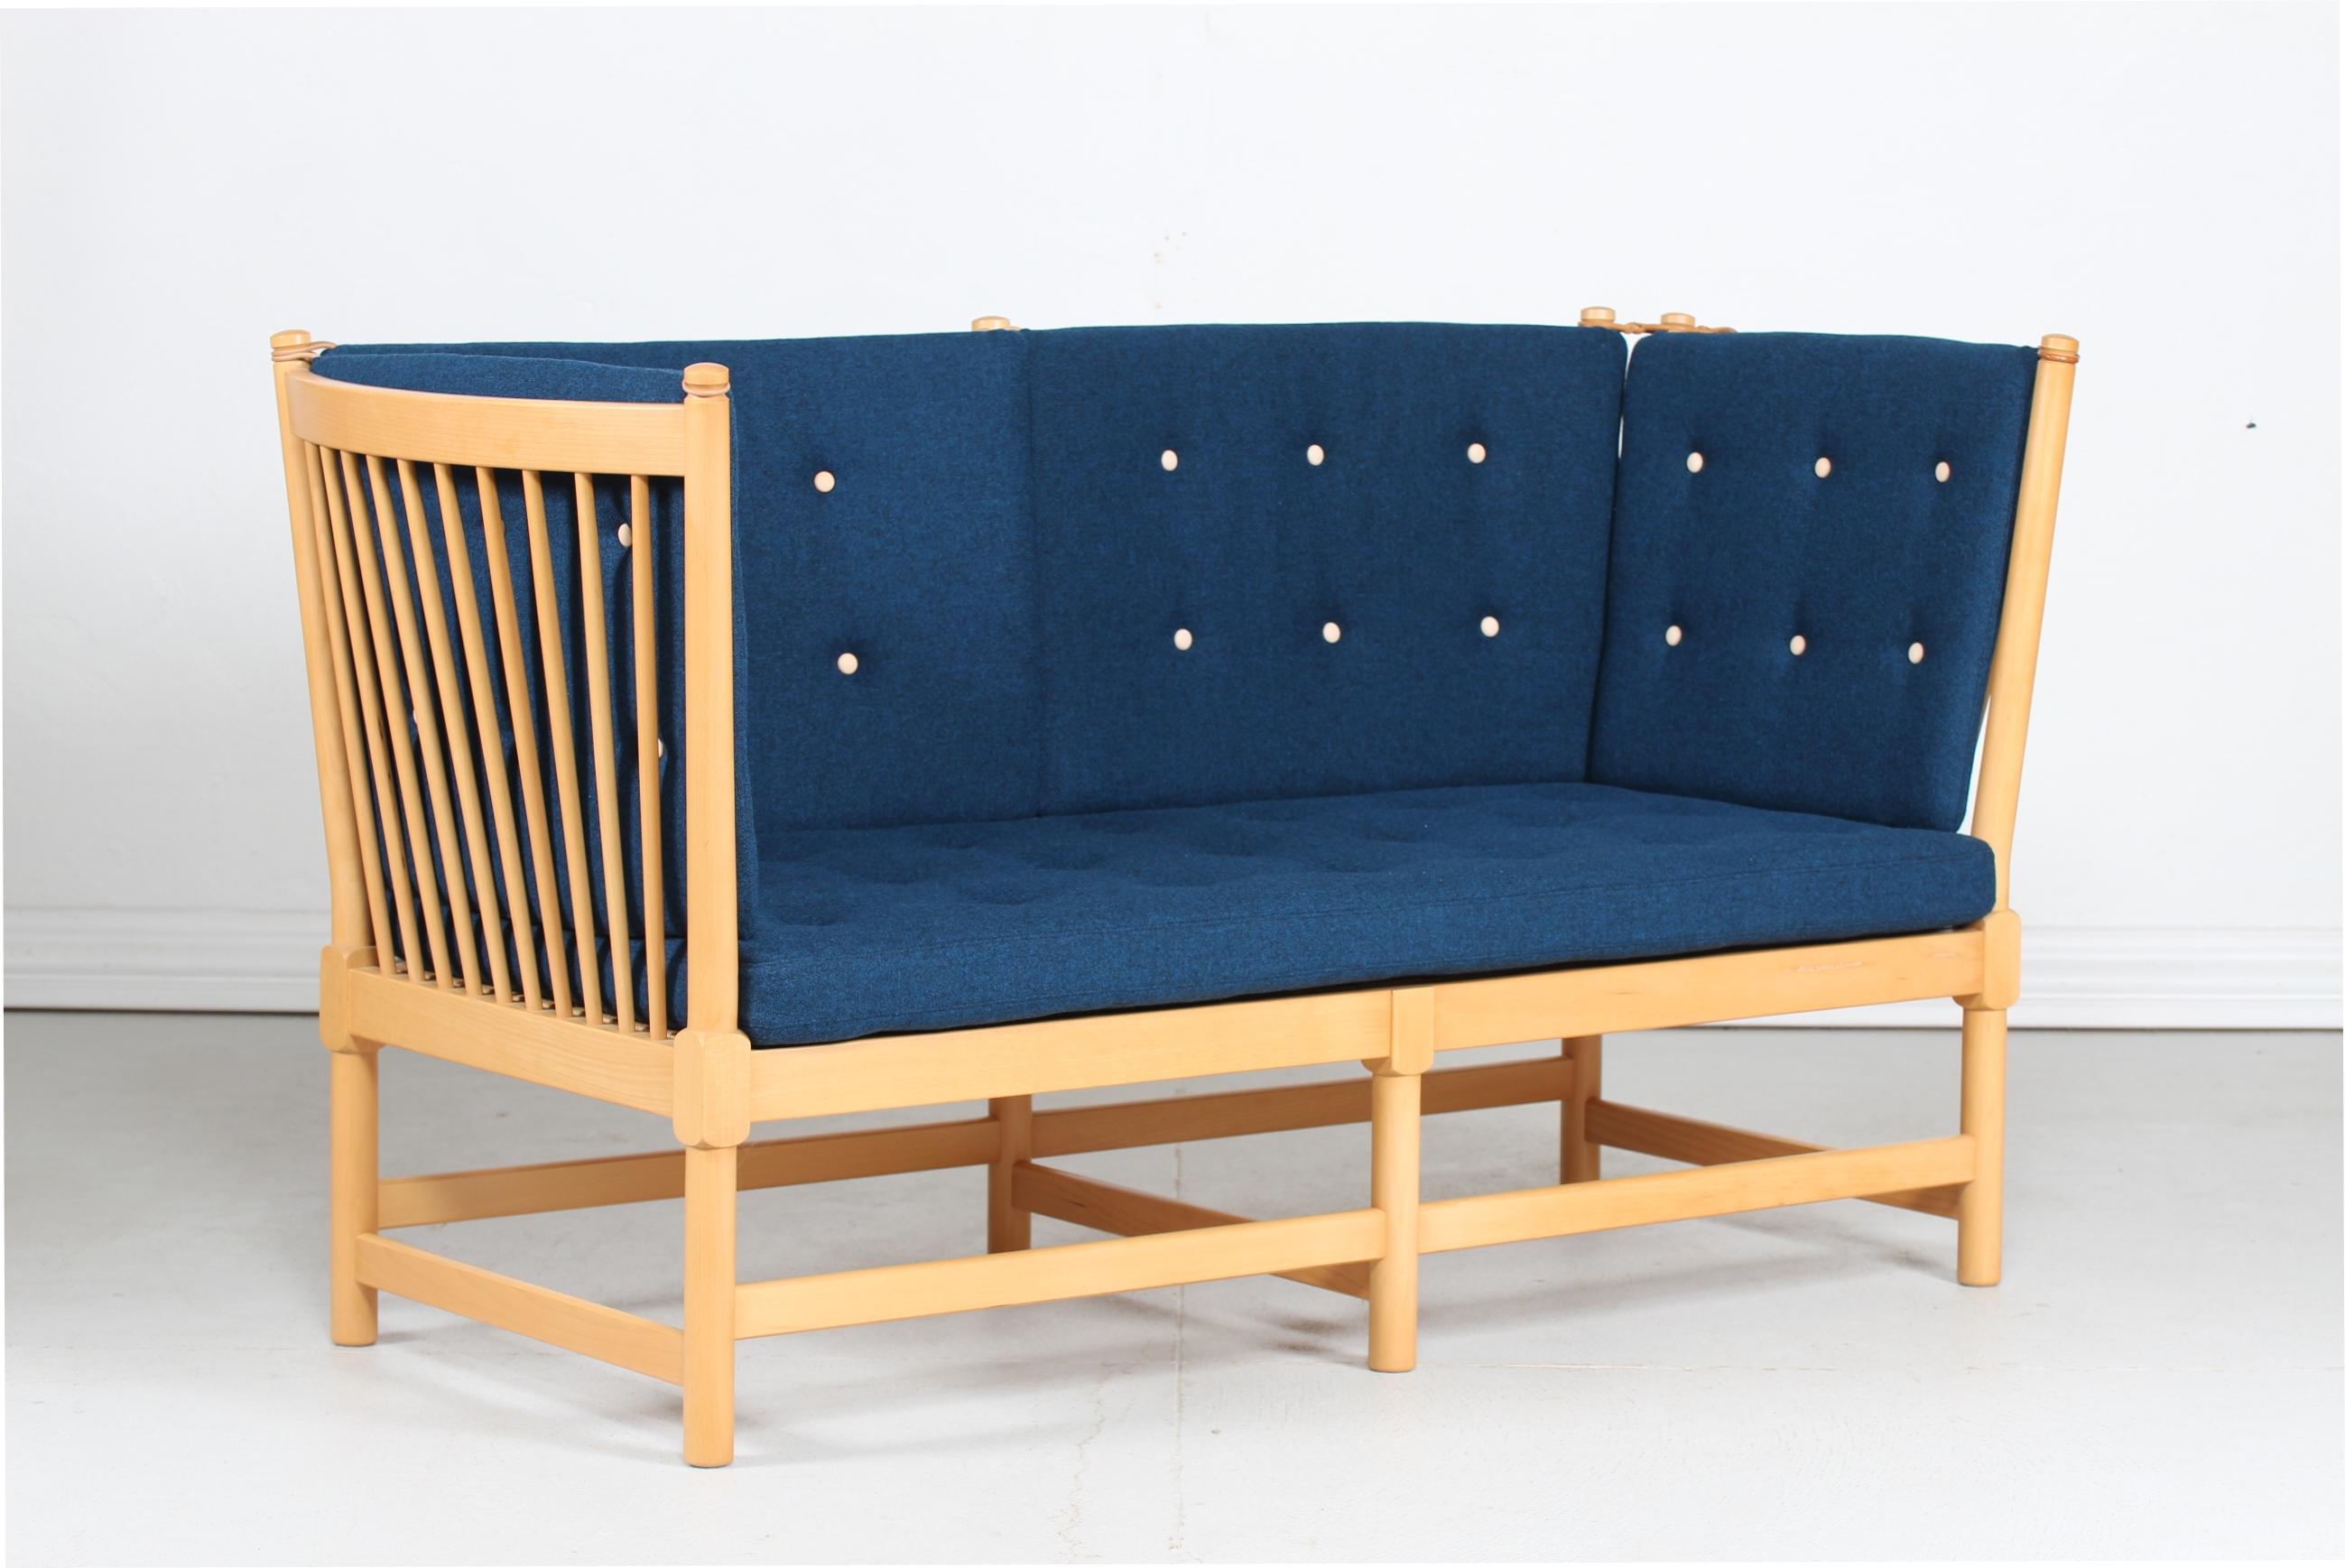 Danish vintage Børge Mogensen spoke back sofa model 1789 made of solid beech with lacquer and reupholstered with new cushions in the fabric Tonica 2 0773 from the Danish textile design company Kvadrat.

The sofa is manufactured by Fritz Hansen A/S